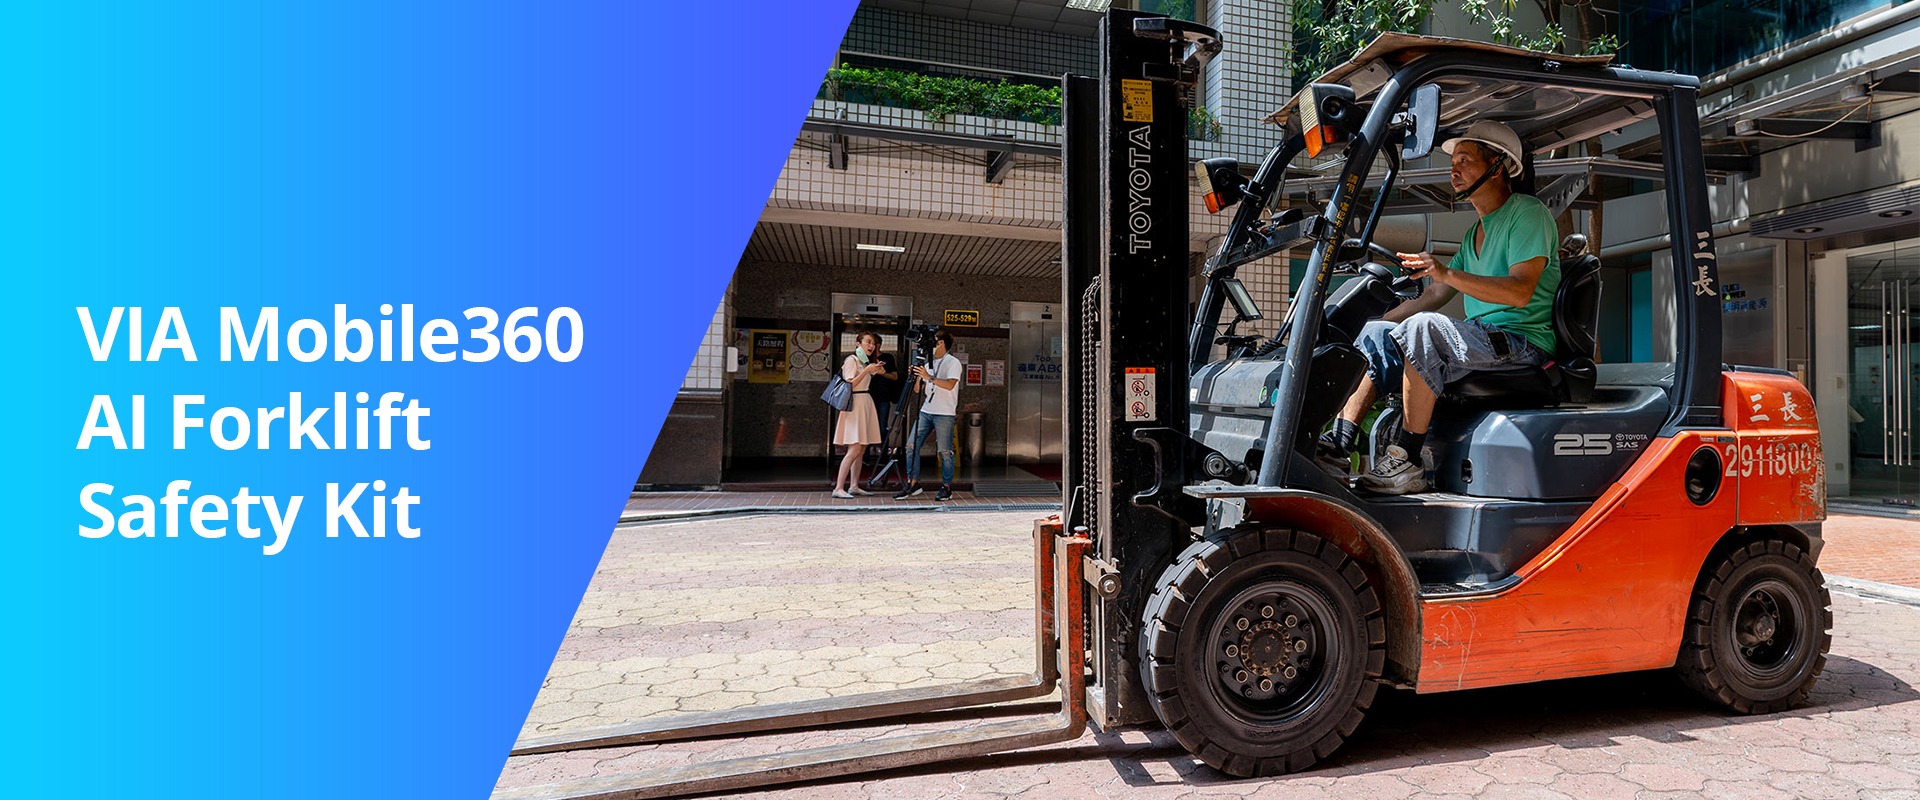 5 Ways the VIA Mobile360 AI Forklift Safety Kit Prevents Accidents